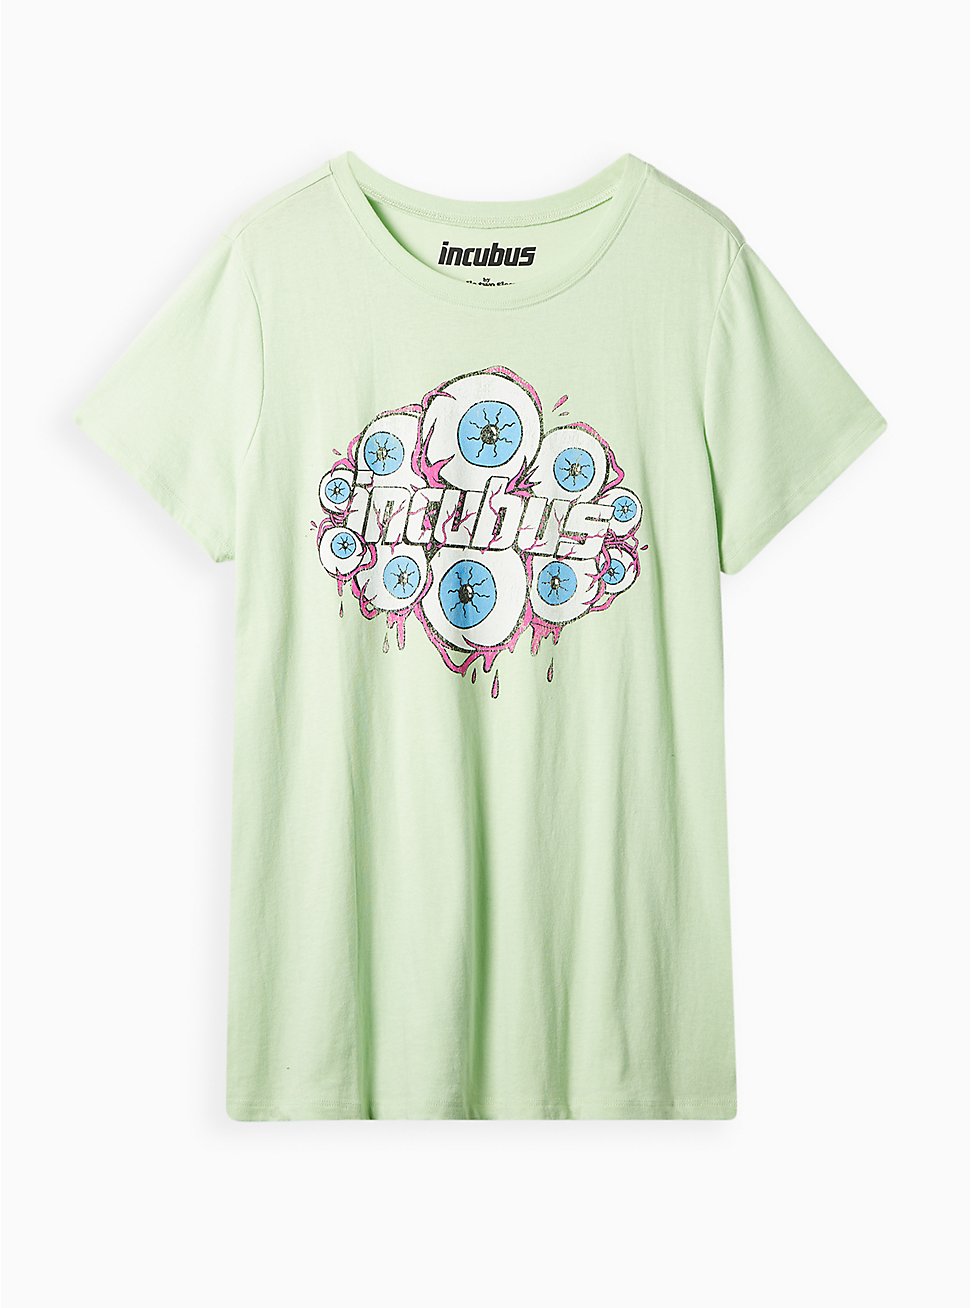 Plus Size Incubus Classic Fit Crew Top - Cotton Light Green , LIGHT GREEN, hi-res